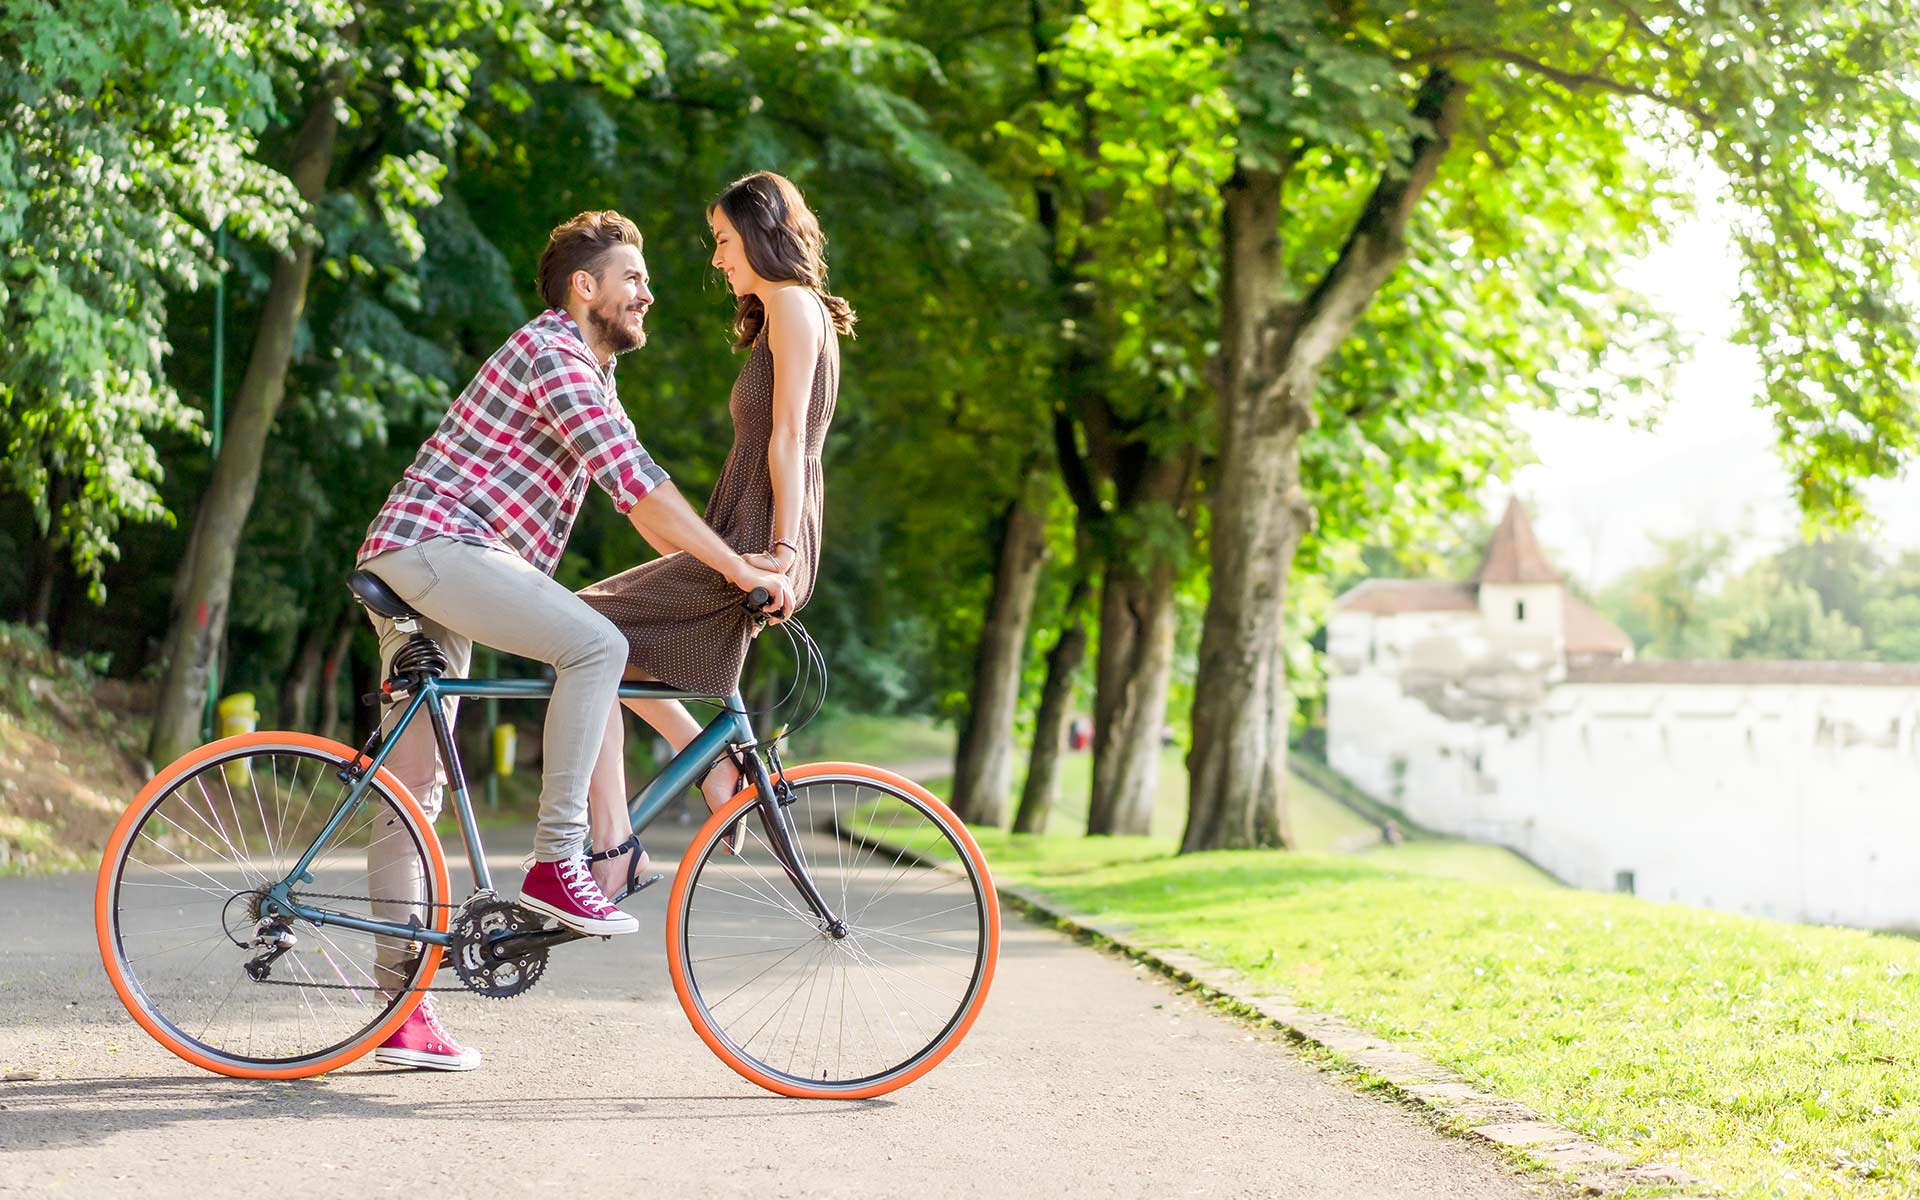 Brunette man with a beard riding a bicycle with brunette woman in brown dress sitting on the wheel looking at him.